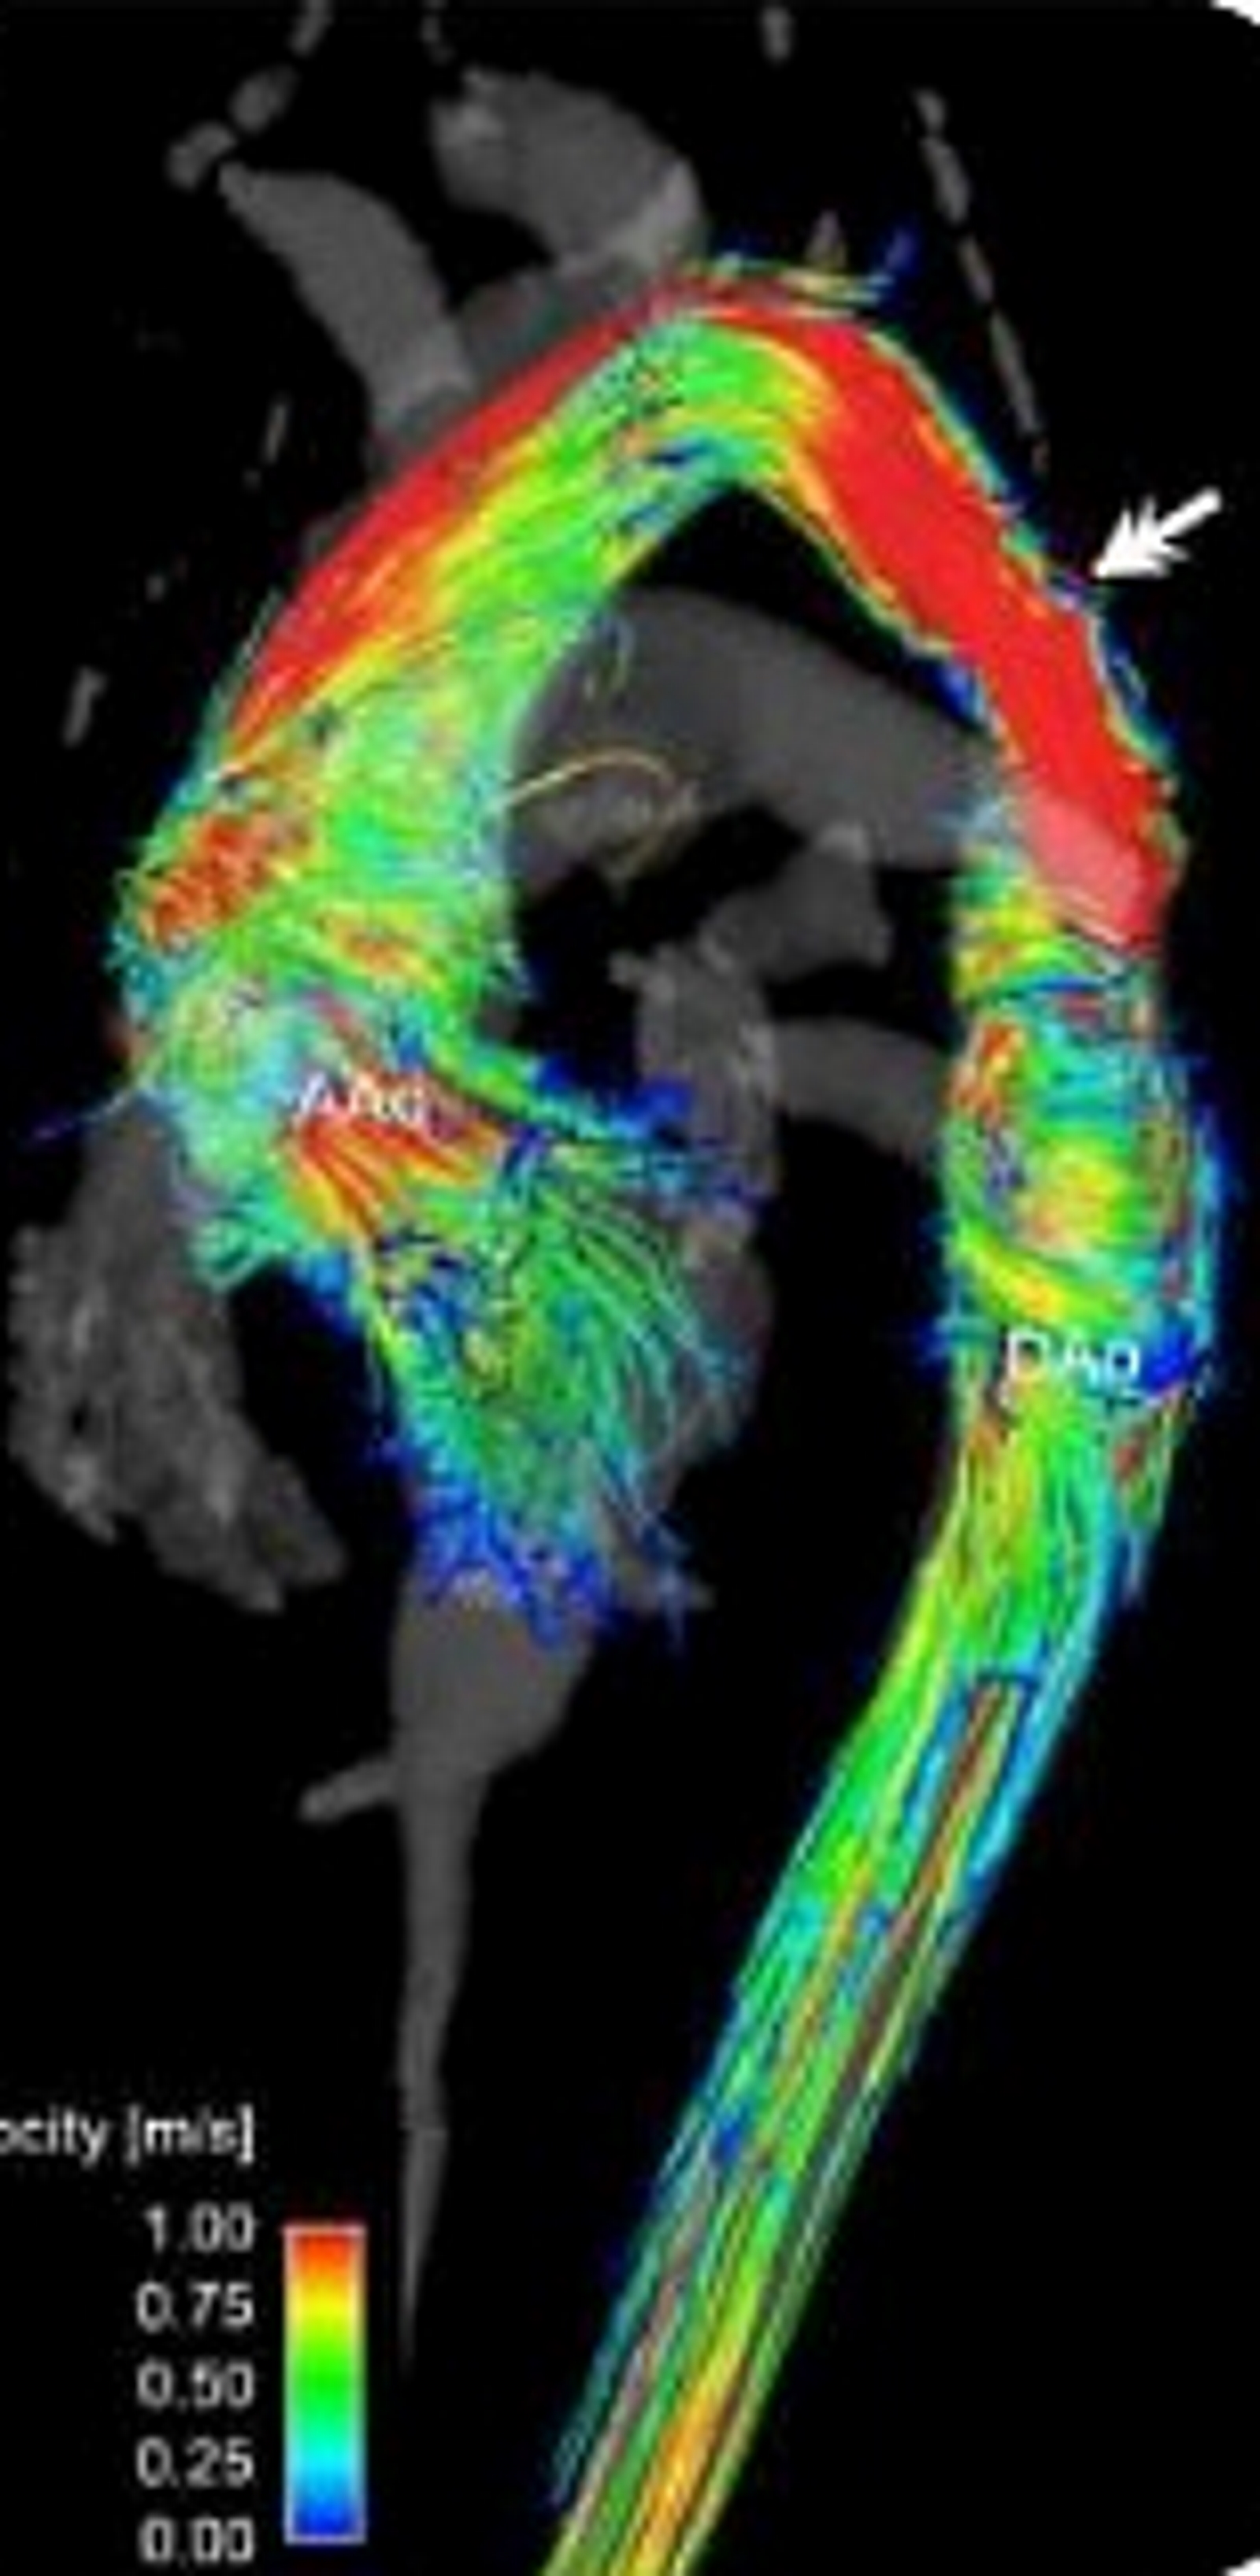 Computerized angio-tomographic showing coarctation of the aorta